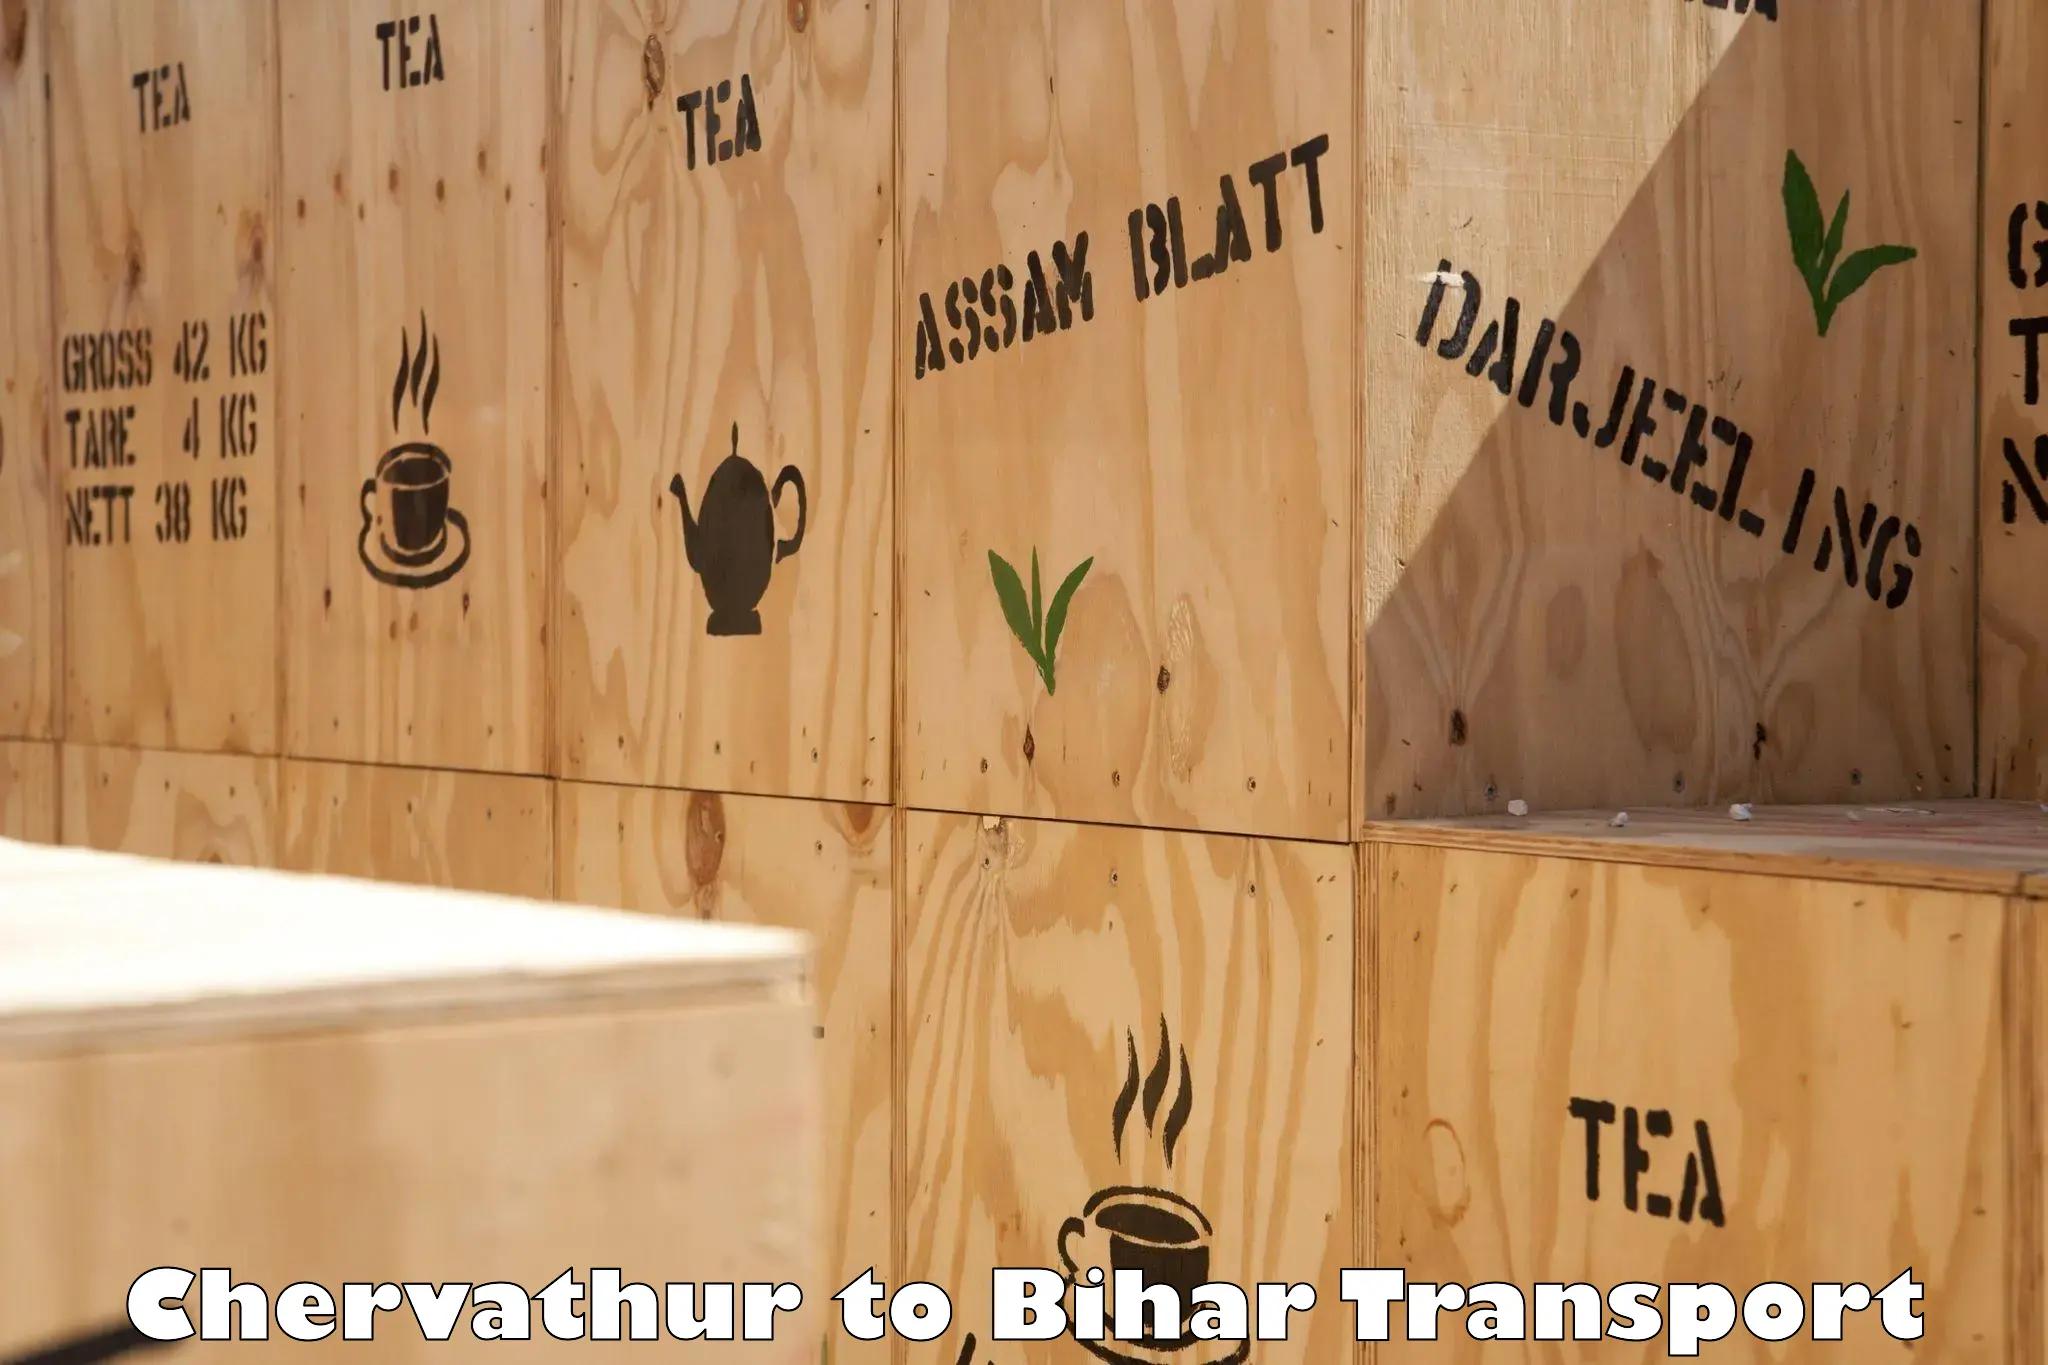 Cargo transport services in Chervathur to Sheohar